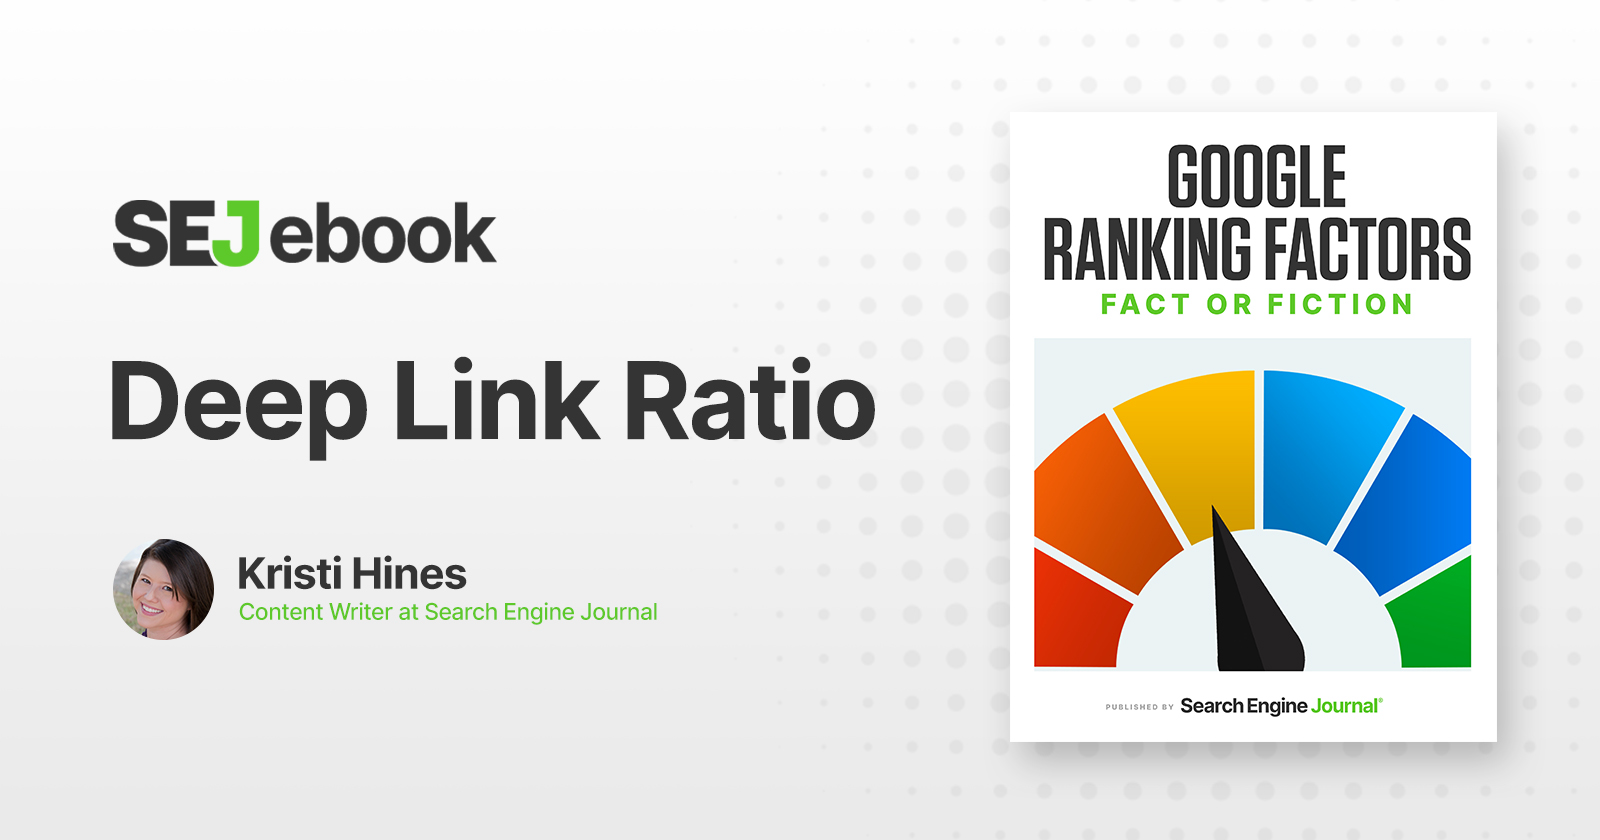 Are 301 Redirects A Google Ranking Factor?